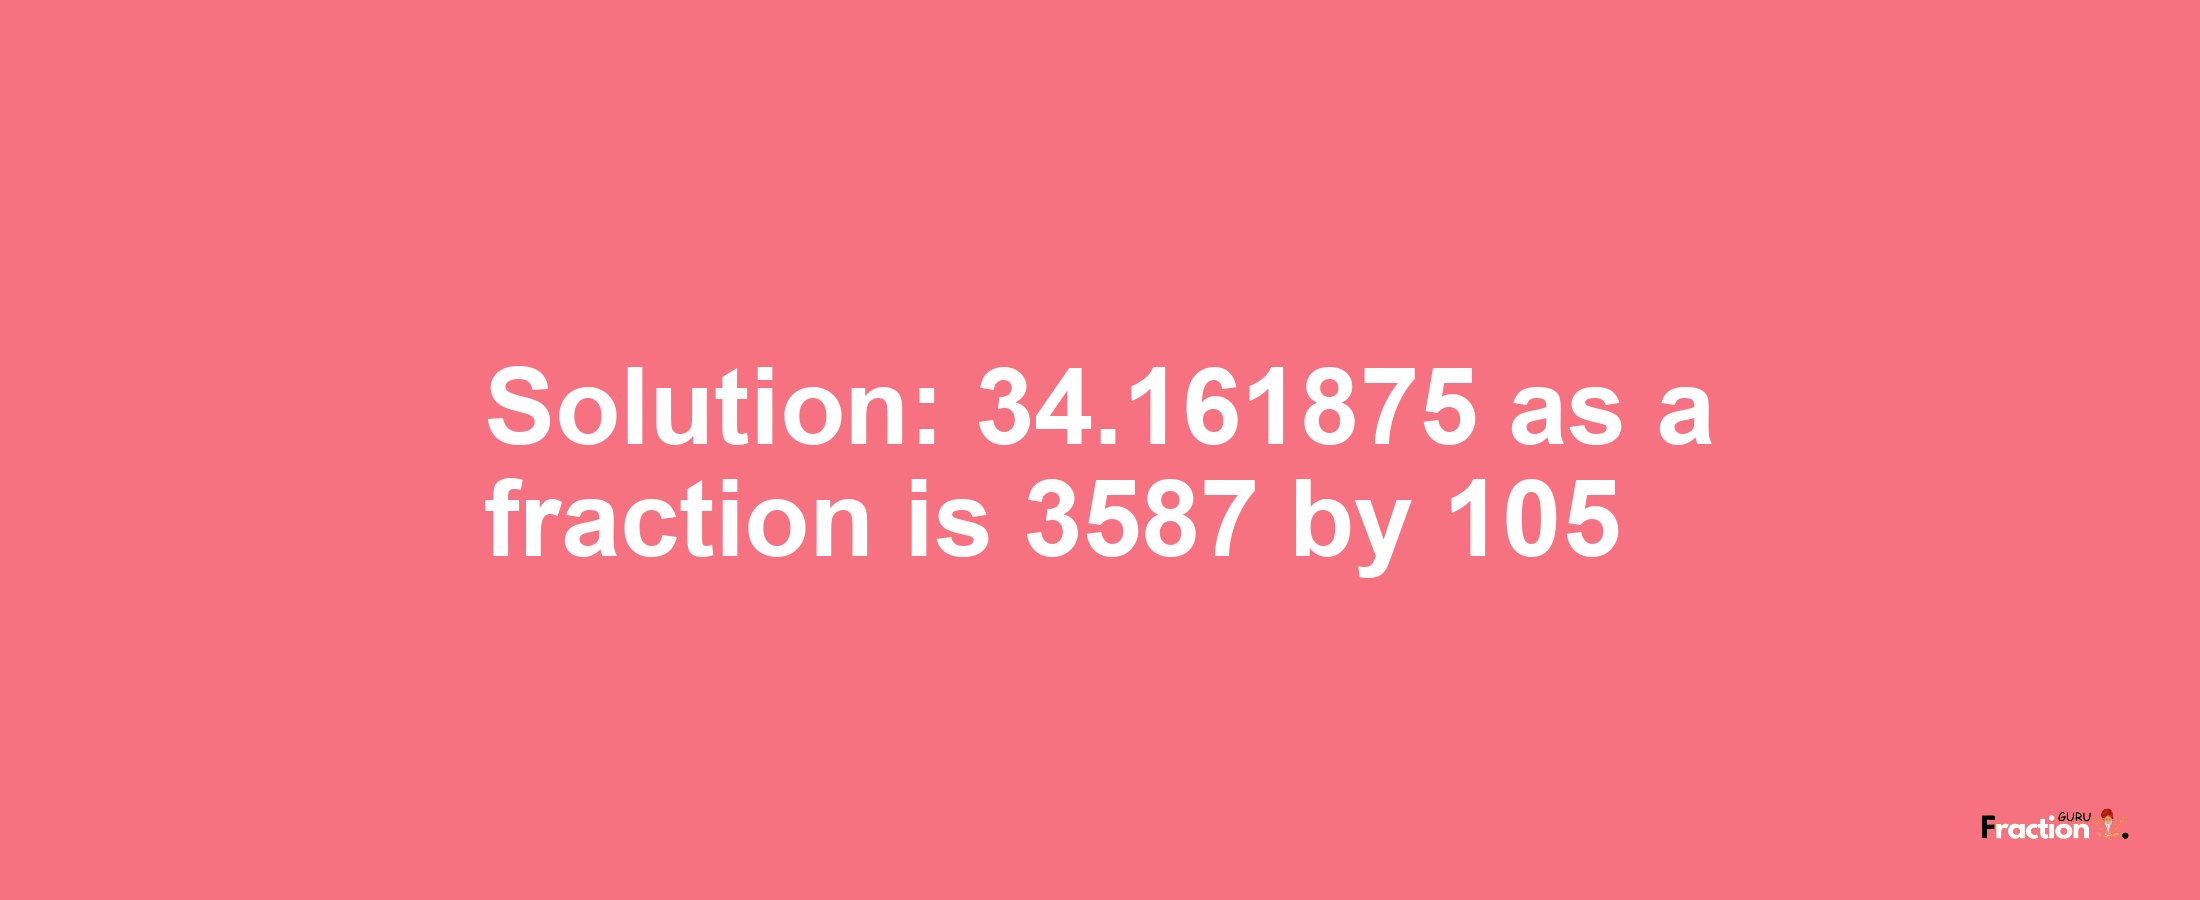 Solution:34.161875 as a fraction is 3587/105